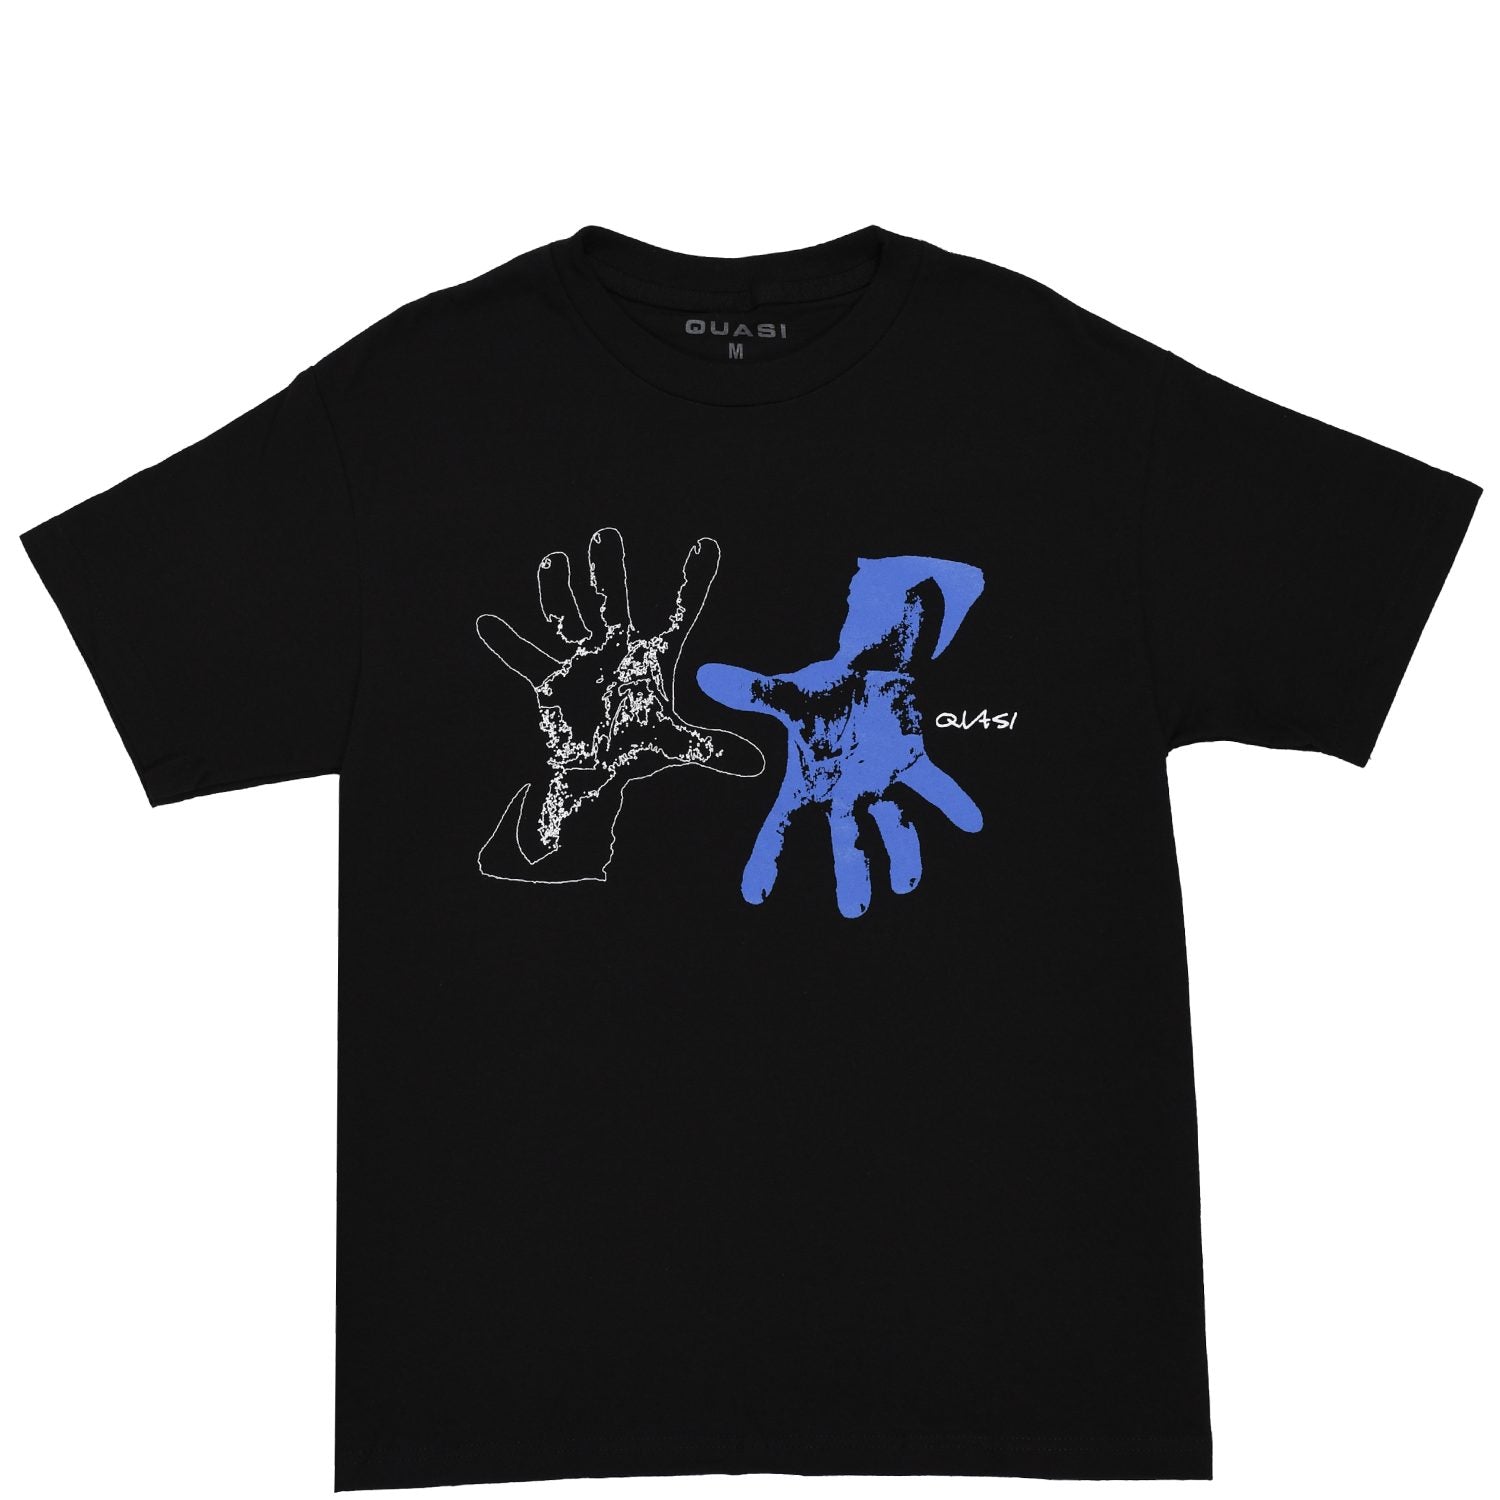 Futuristic graphic of 2 blue and white hands, mid-weight, black short-sleeve tee, made from 100% Cotton, presented by Quasi Skateboards.